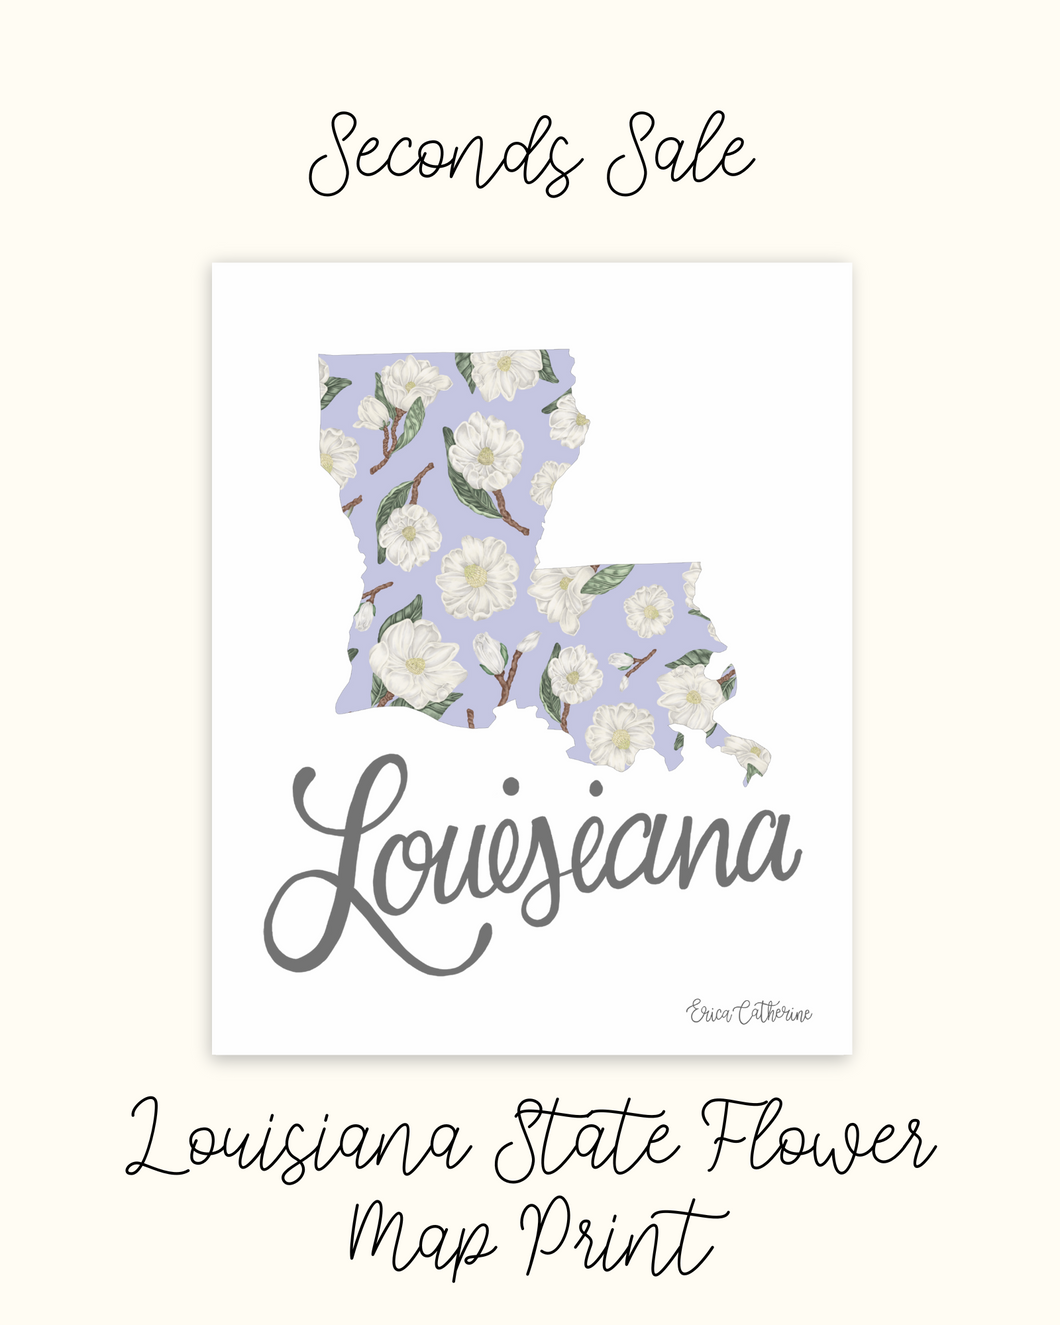 Louisiana State Flower Map Print - Seconds Sale